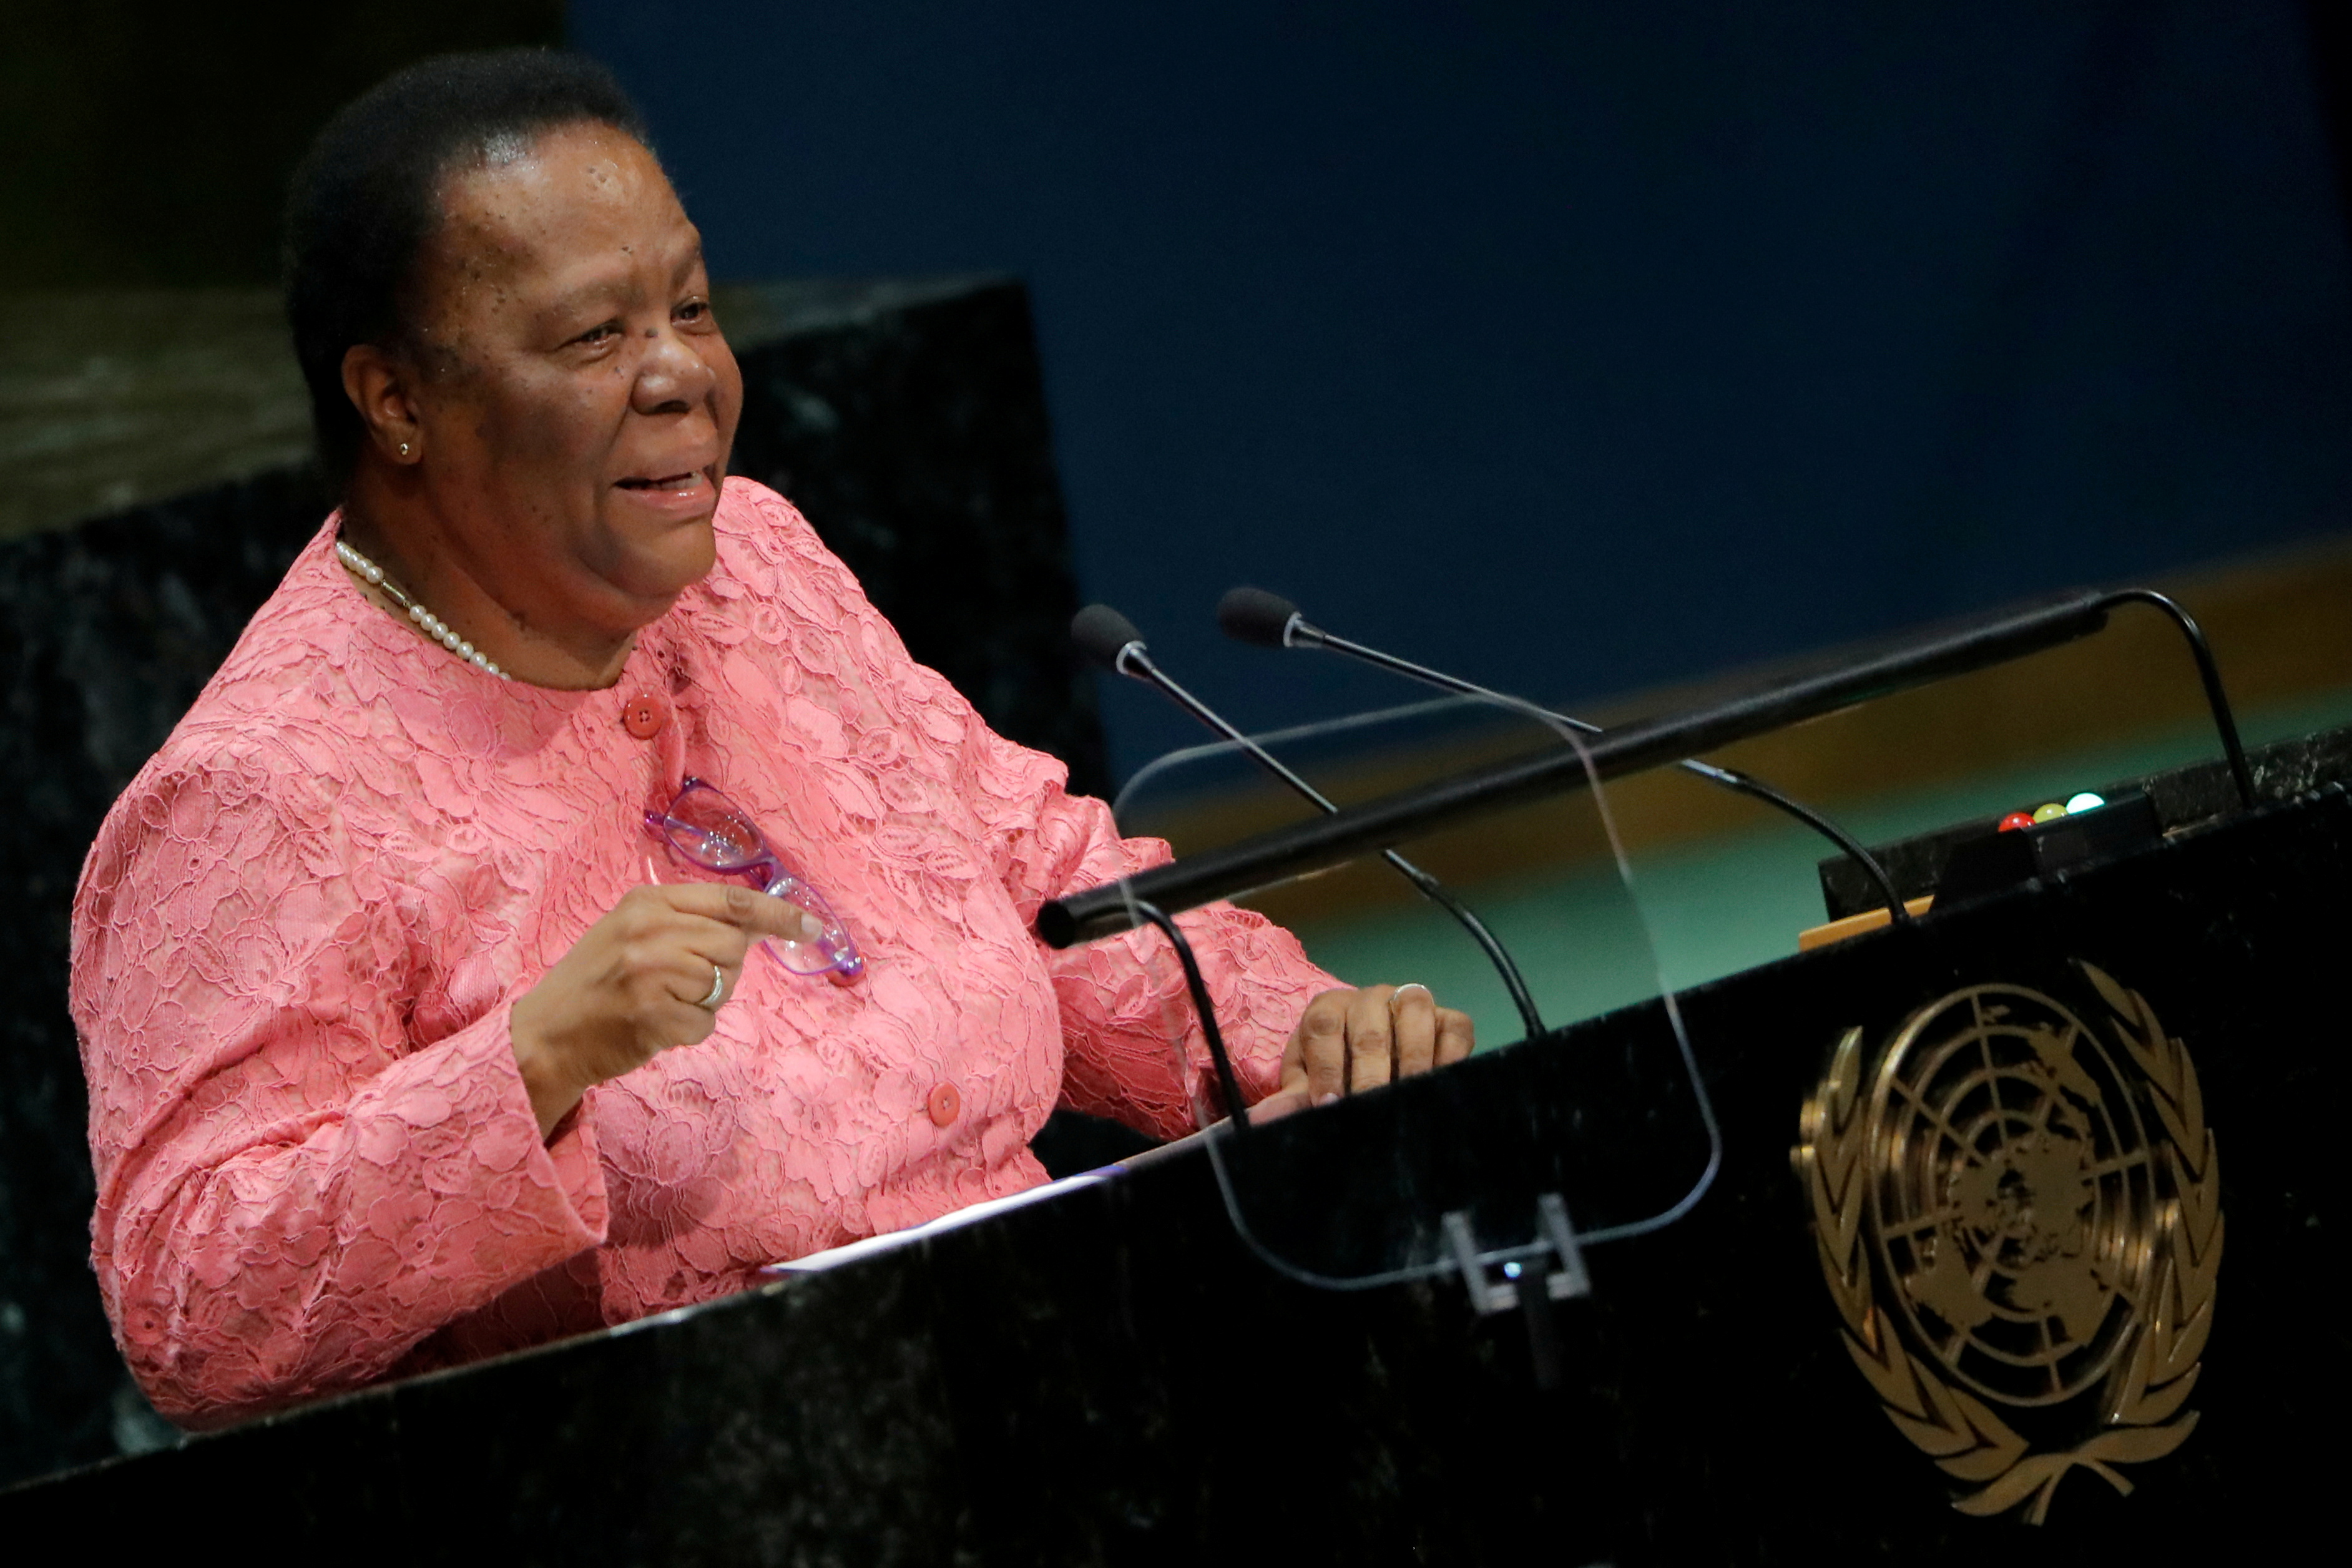 South Africa's Minister for International Relations and Cooperation Naledi Pandor addresses the 74th session of the United Nations General Assembly at U.N. headquarters in New York City, New York